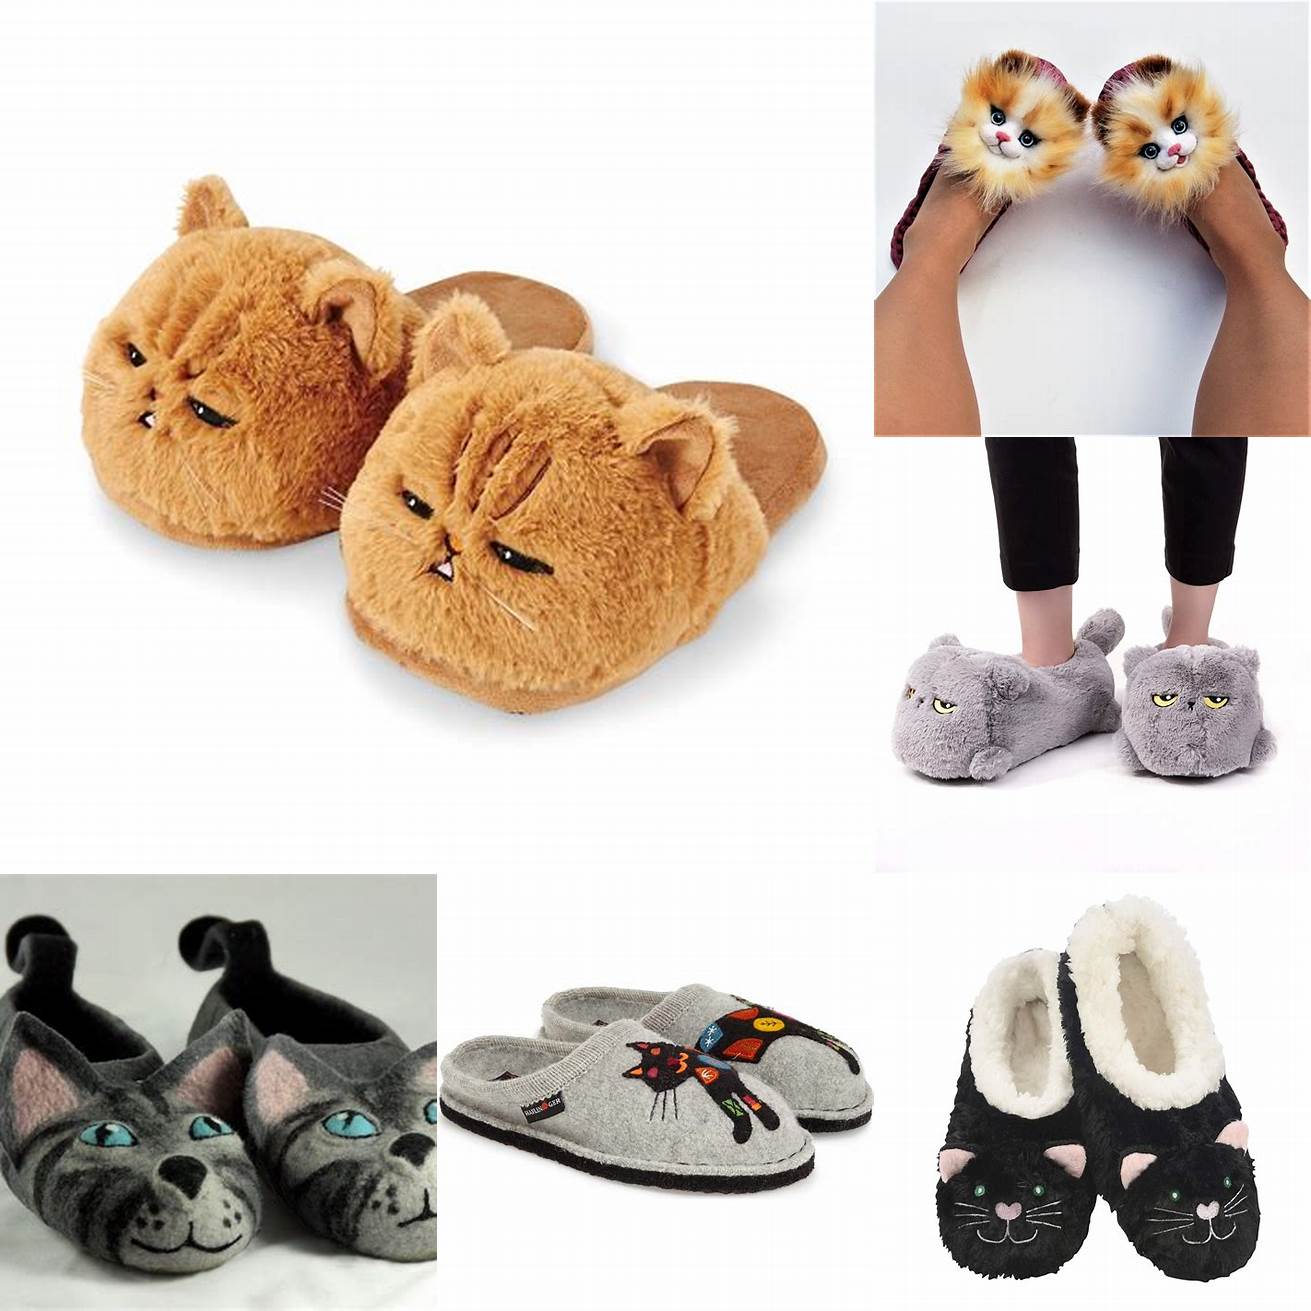 Pair them with cat slippers